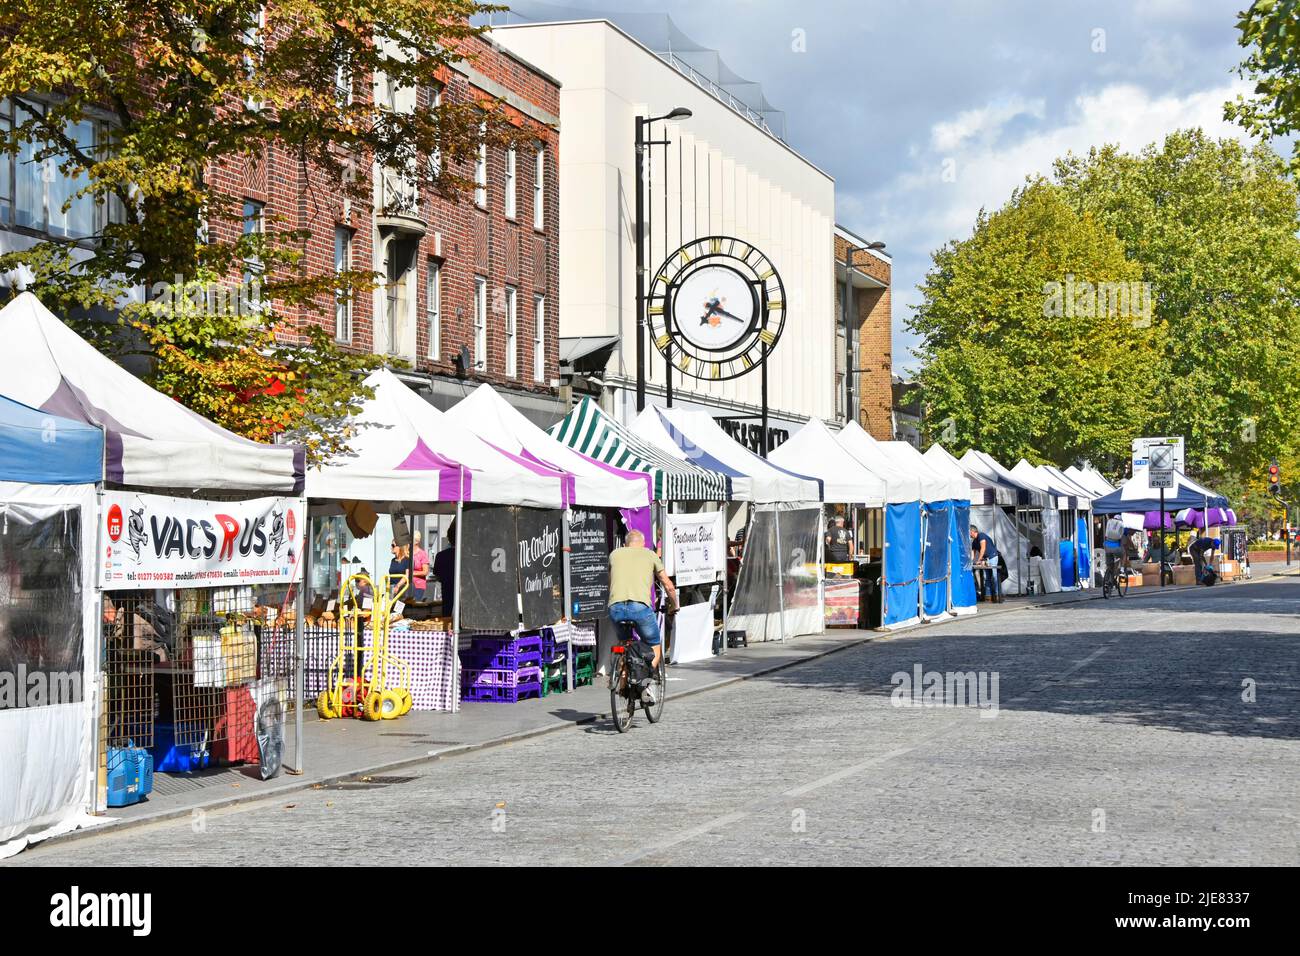 Shopping high street view pavement roadside market stalls in Brentwood Essex cyclists pedalling along cobble stone road clock wrong time England UK Stock Photo